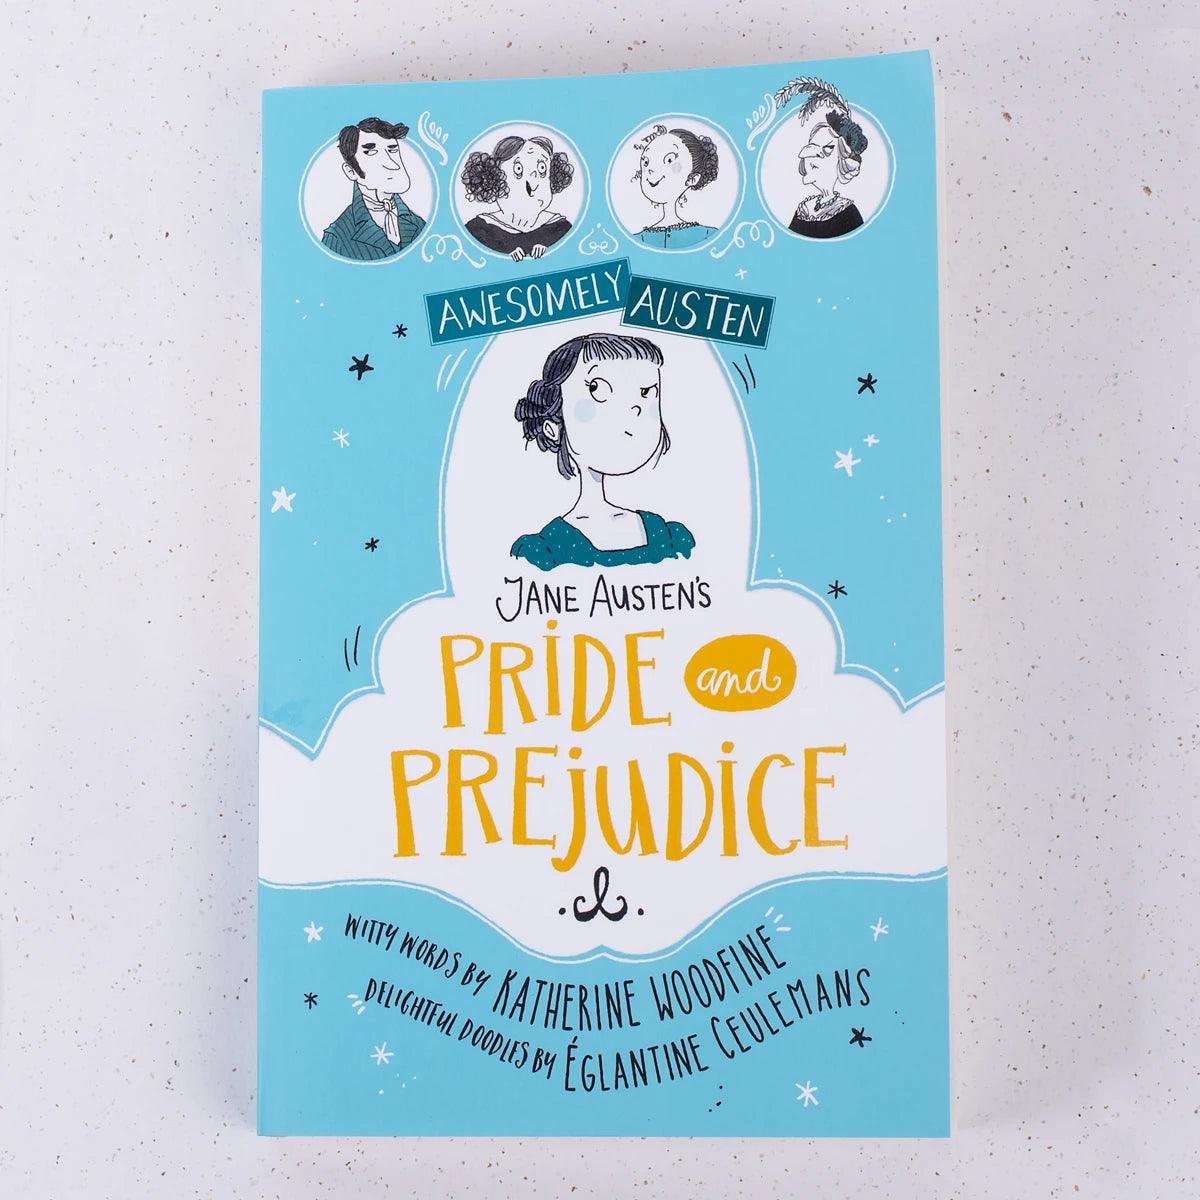 Jane Austen's Pride and Prejudice-Awesomely Austen Retold & Illustrated